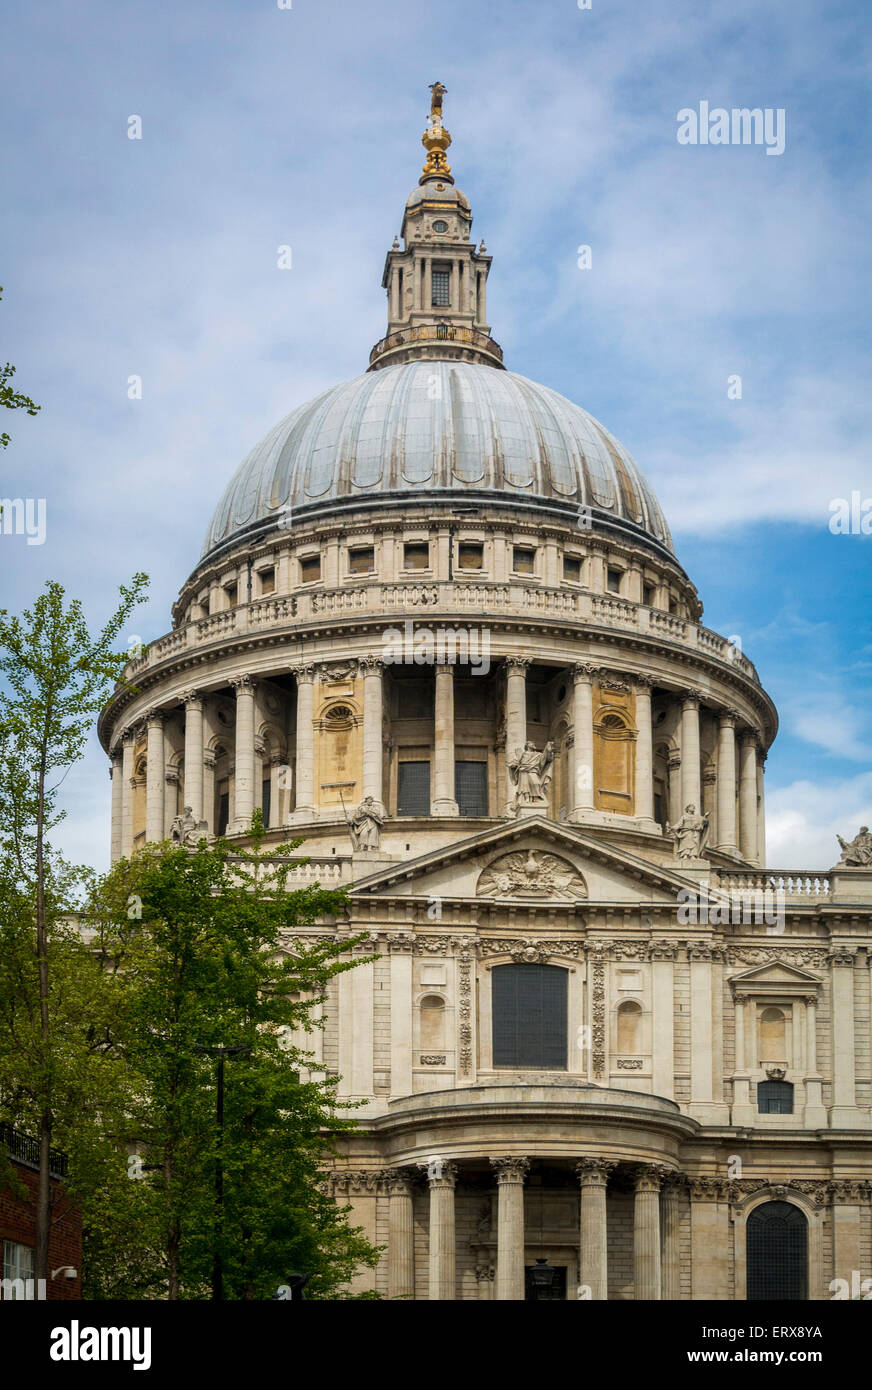 South façade of St Paul's Cathedral, London, Großbritannien. Stockfoto